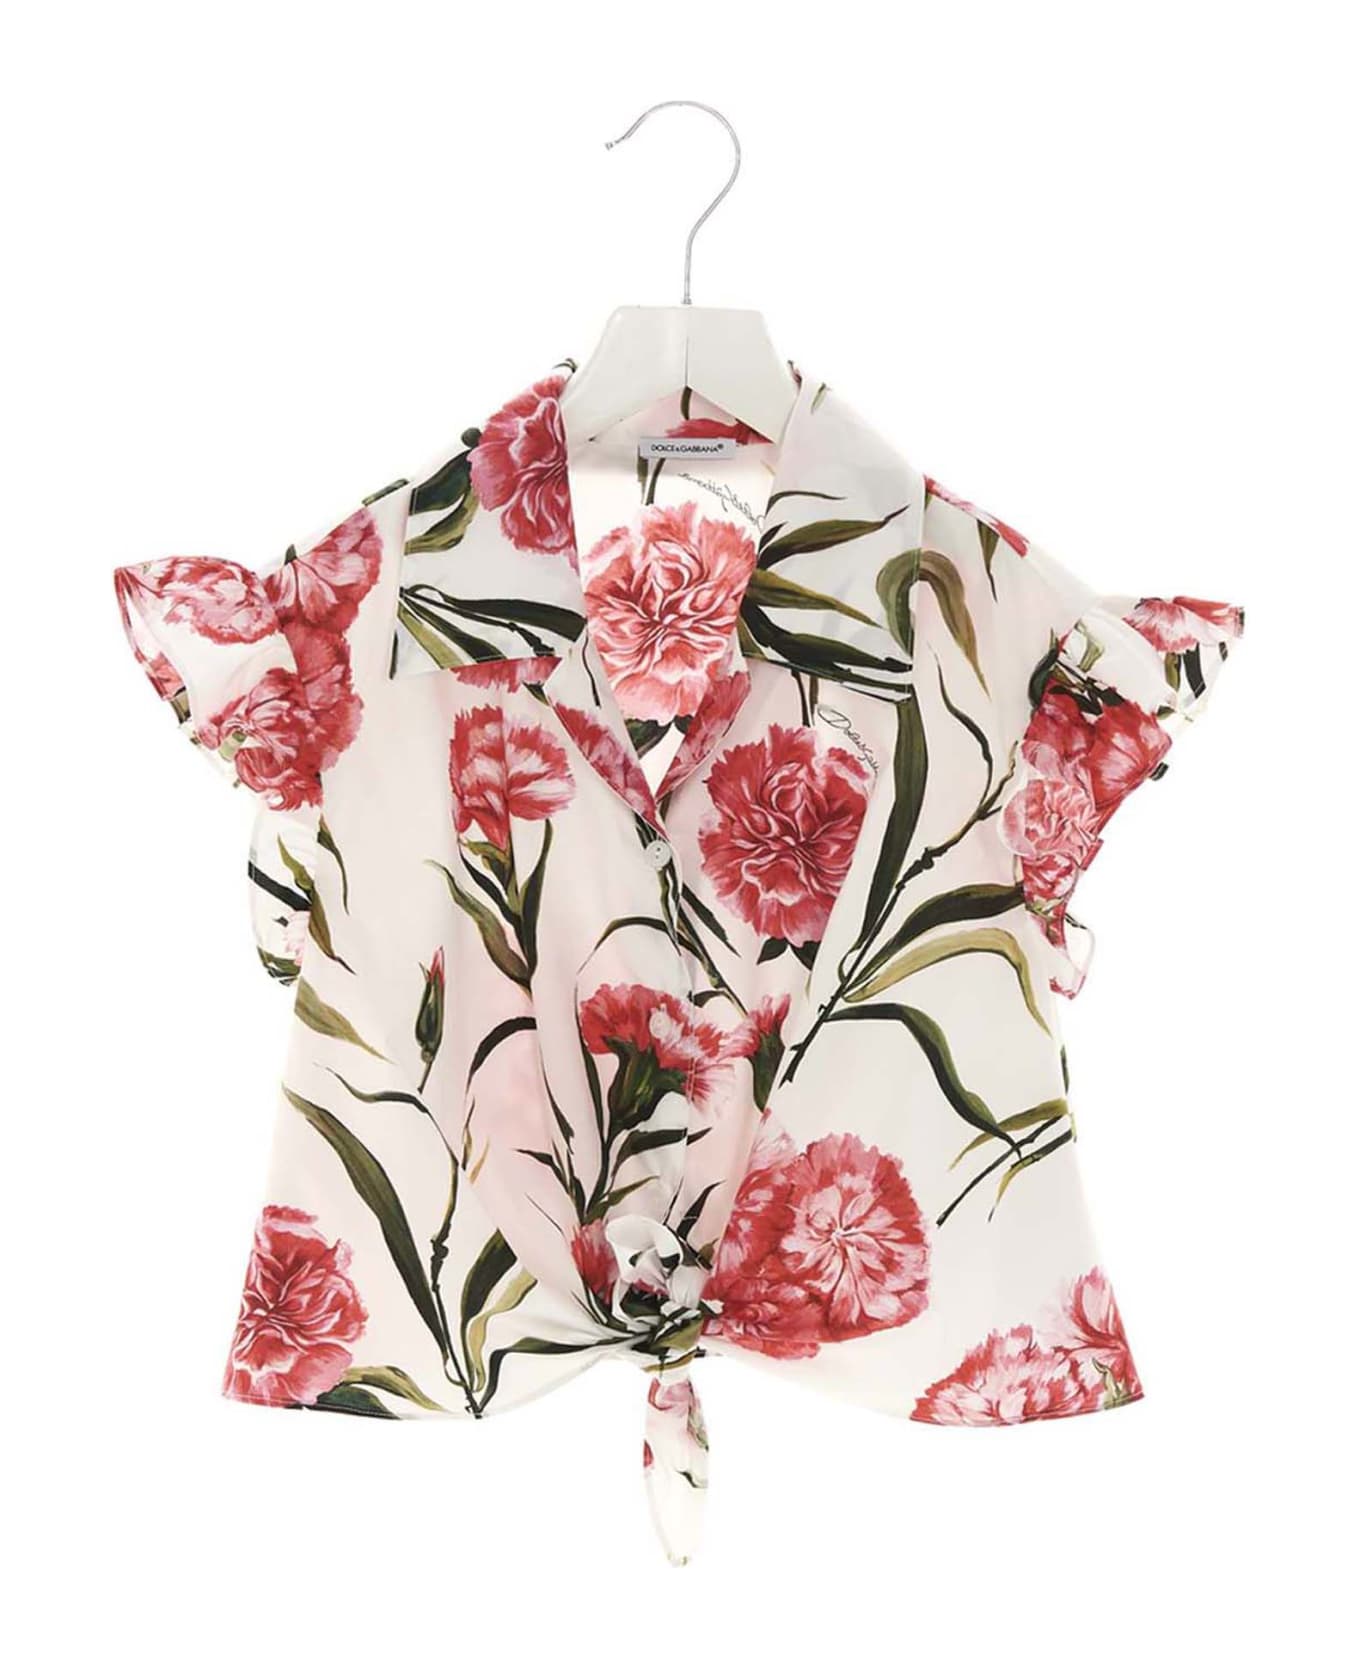 Dolce & Gabbana Floral Shirt - WHITE/RED シャツ